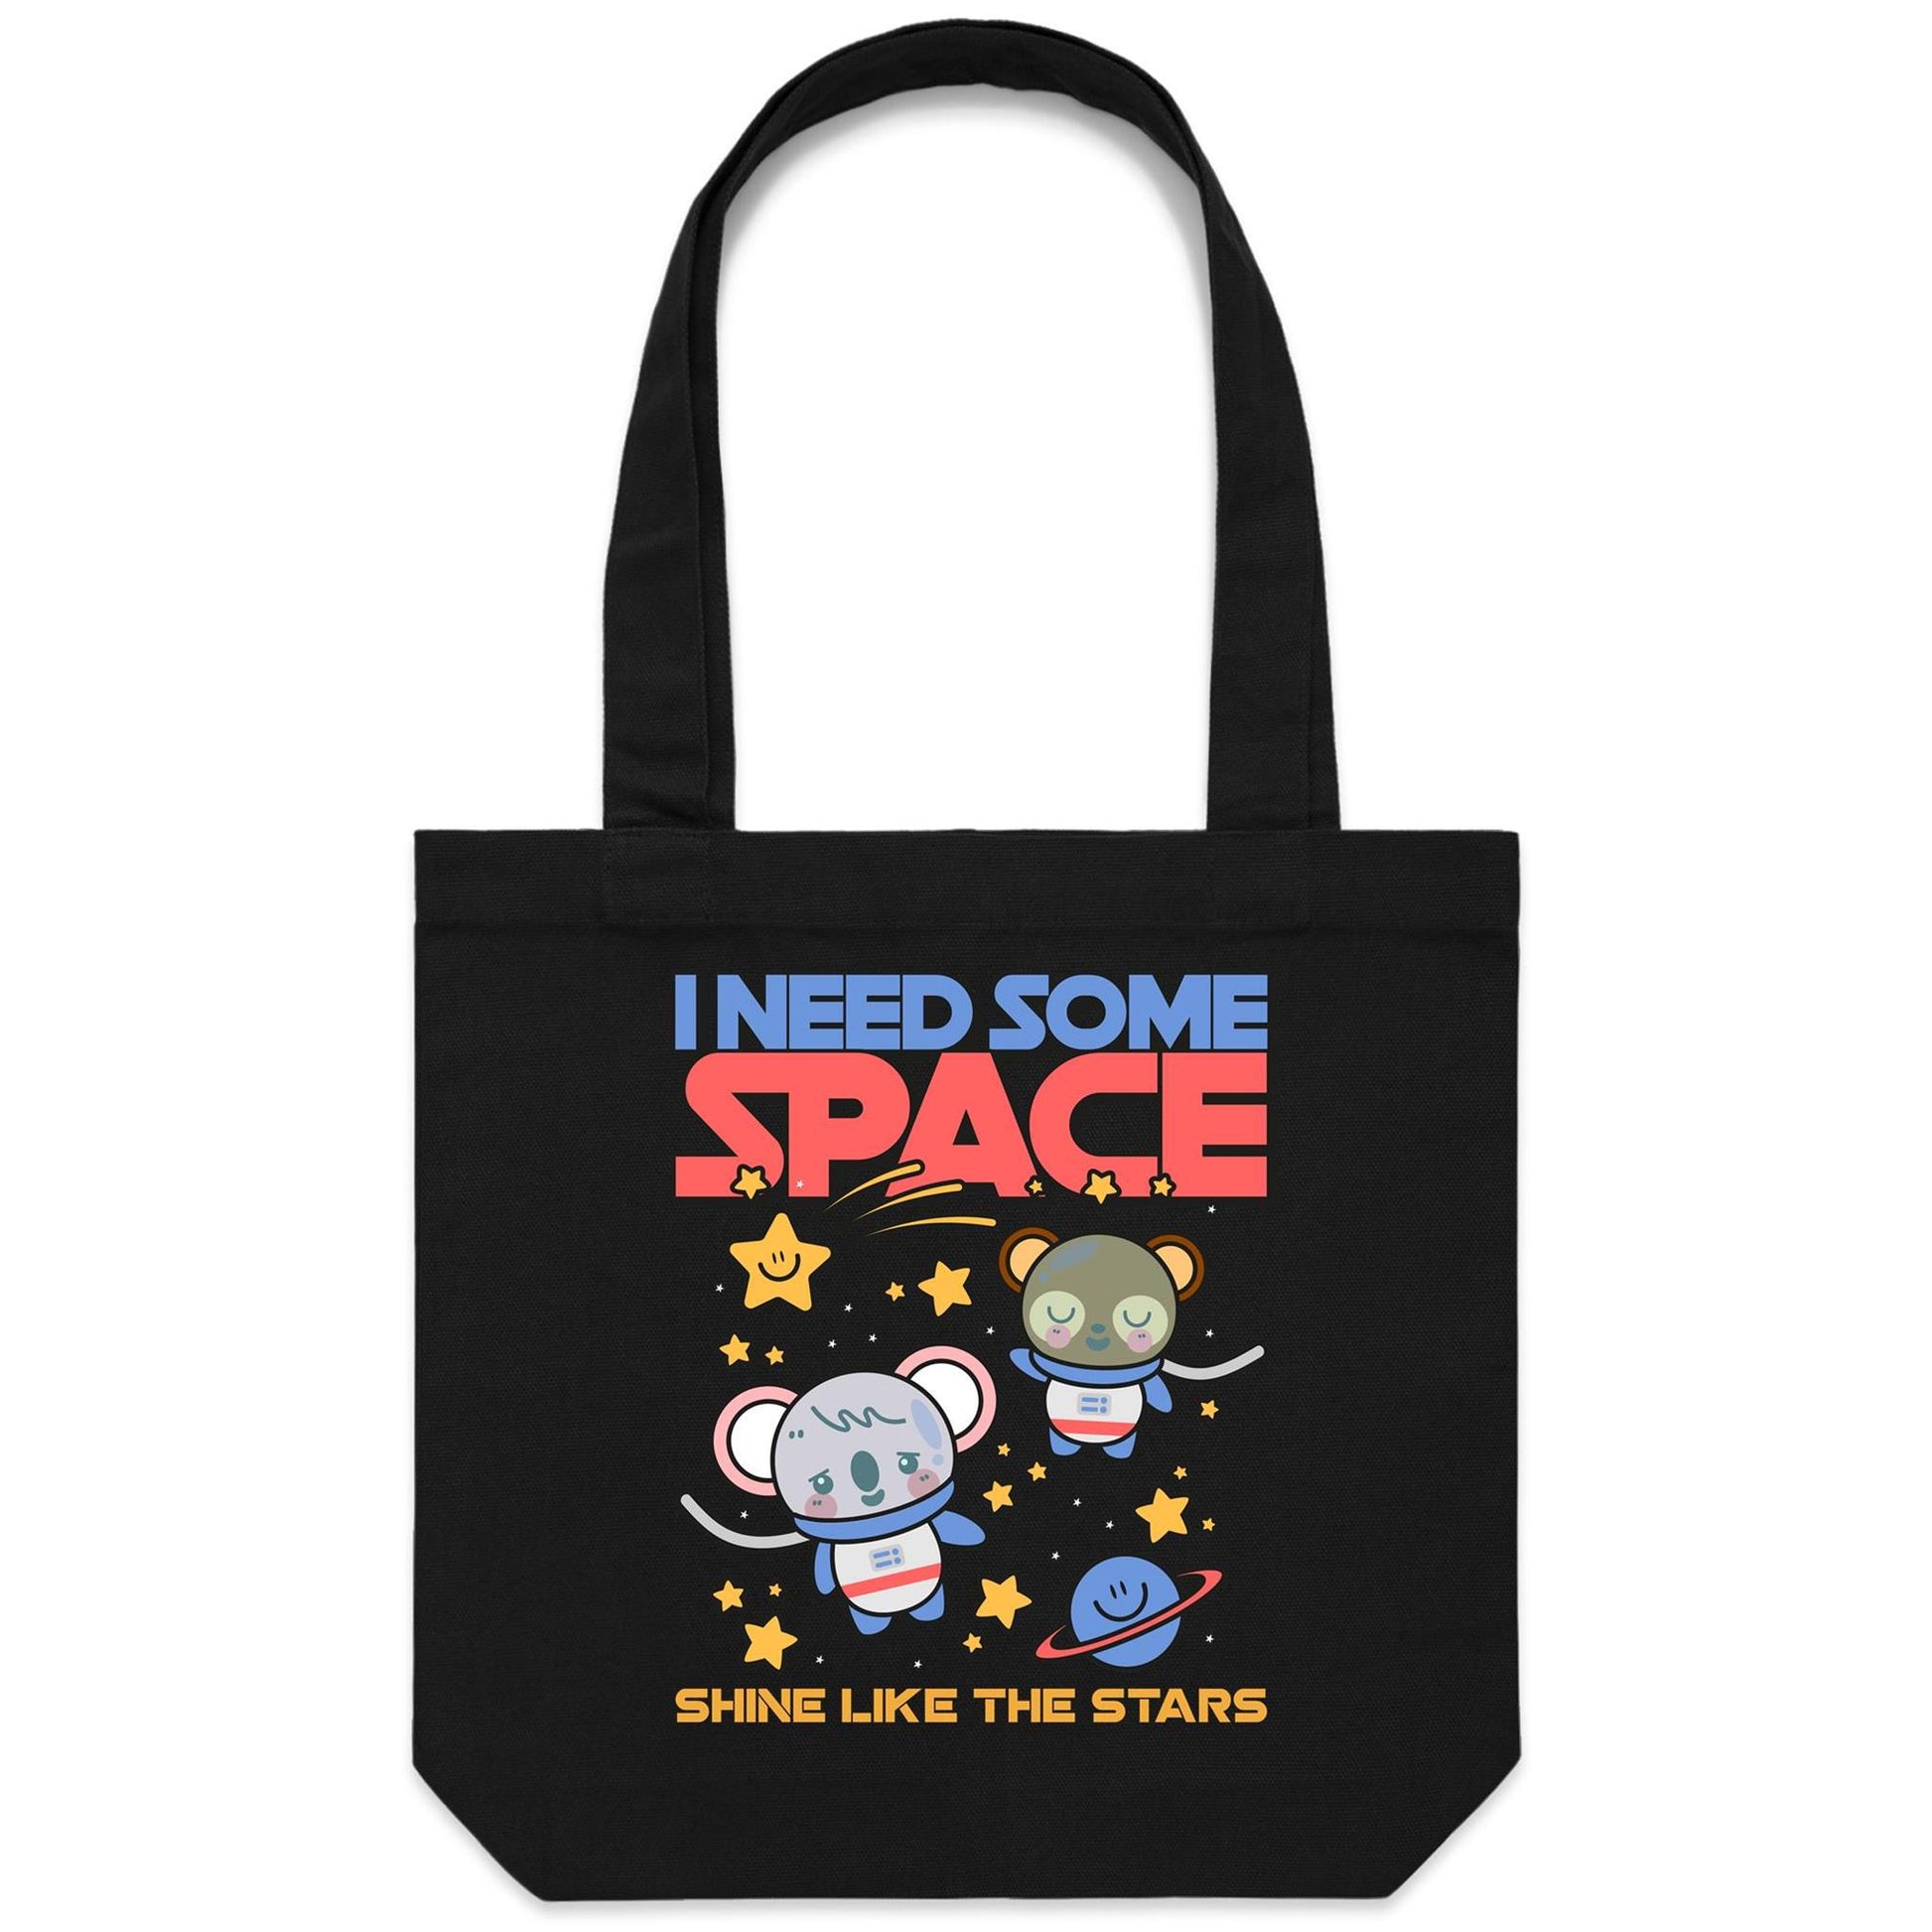 I Need Some Space - Canvas Tote Bag Black One Size Tote Bag Space